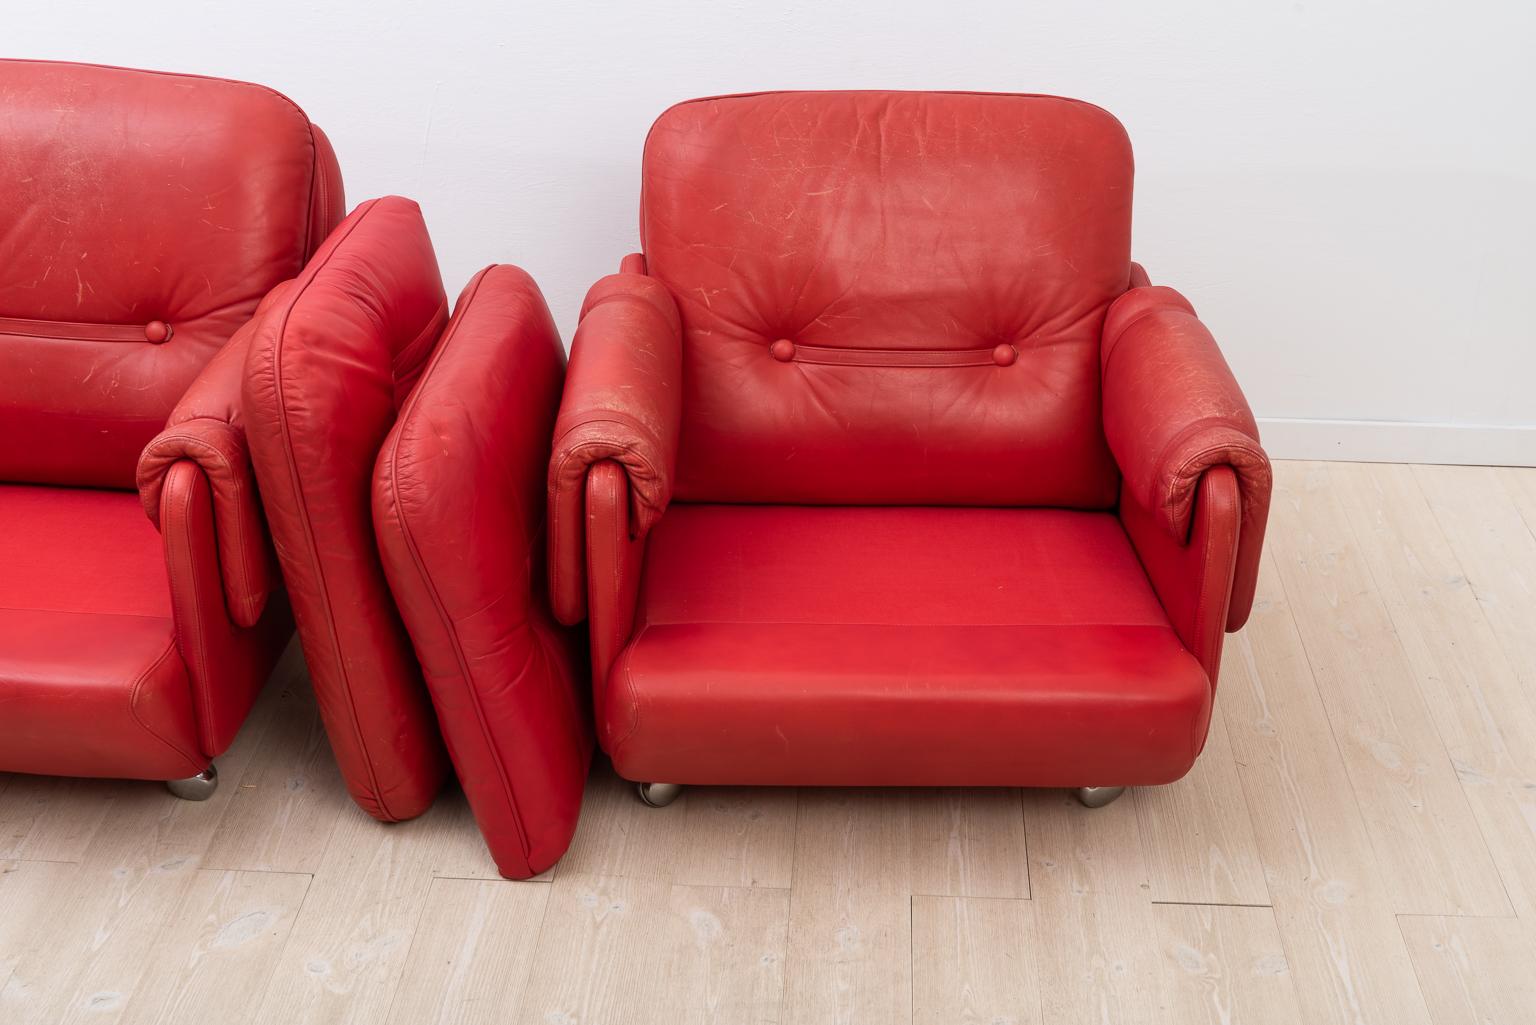 Lombardia Red Leather Armchairs by Risto Holme for IKEA In Good Condition For Sale In Kramfors, SE